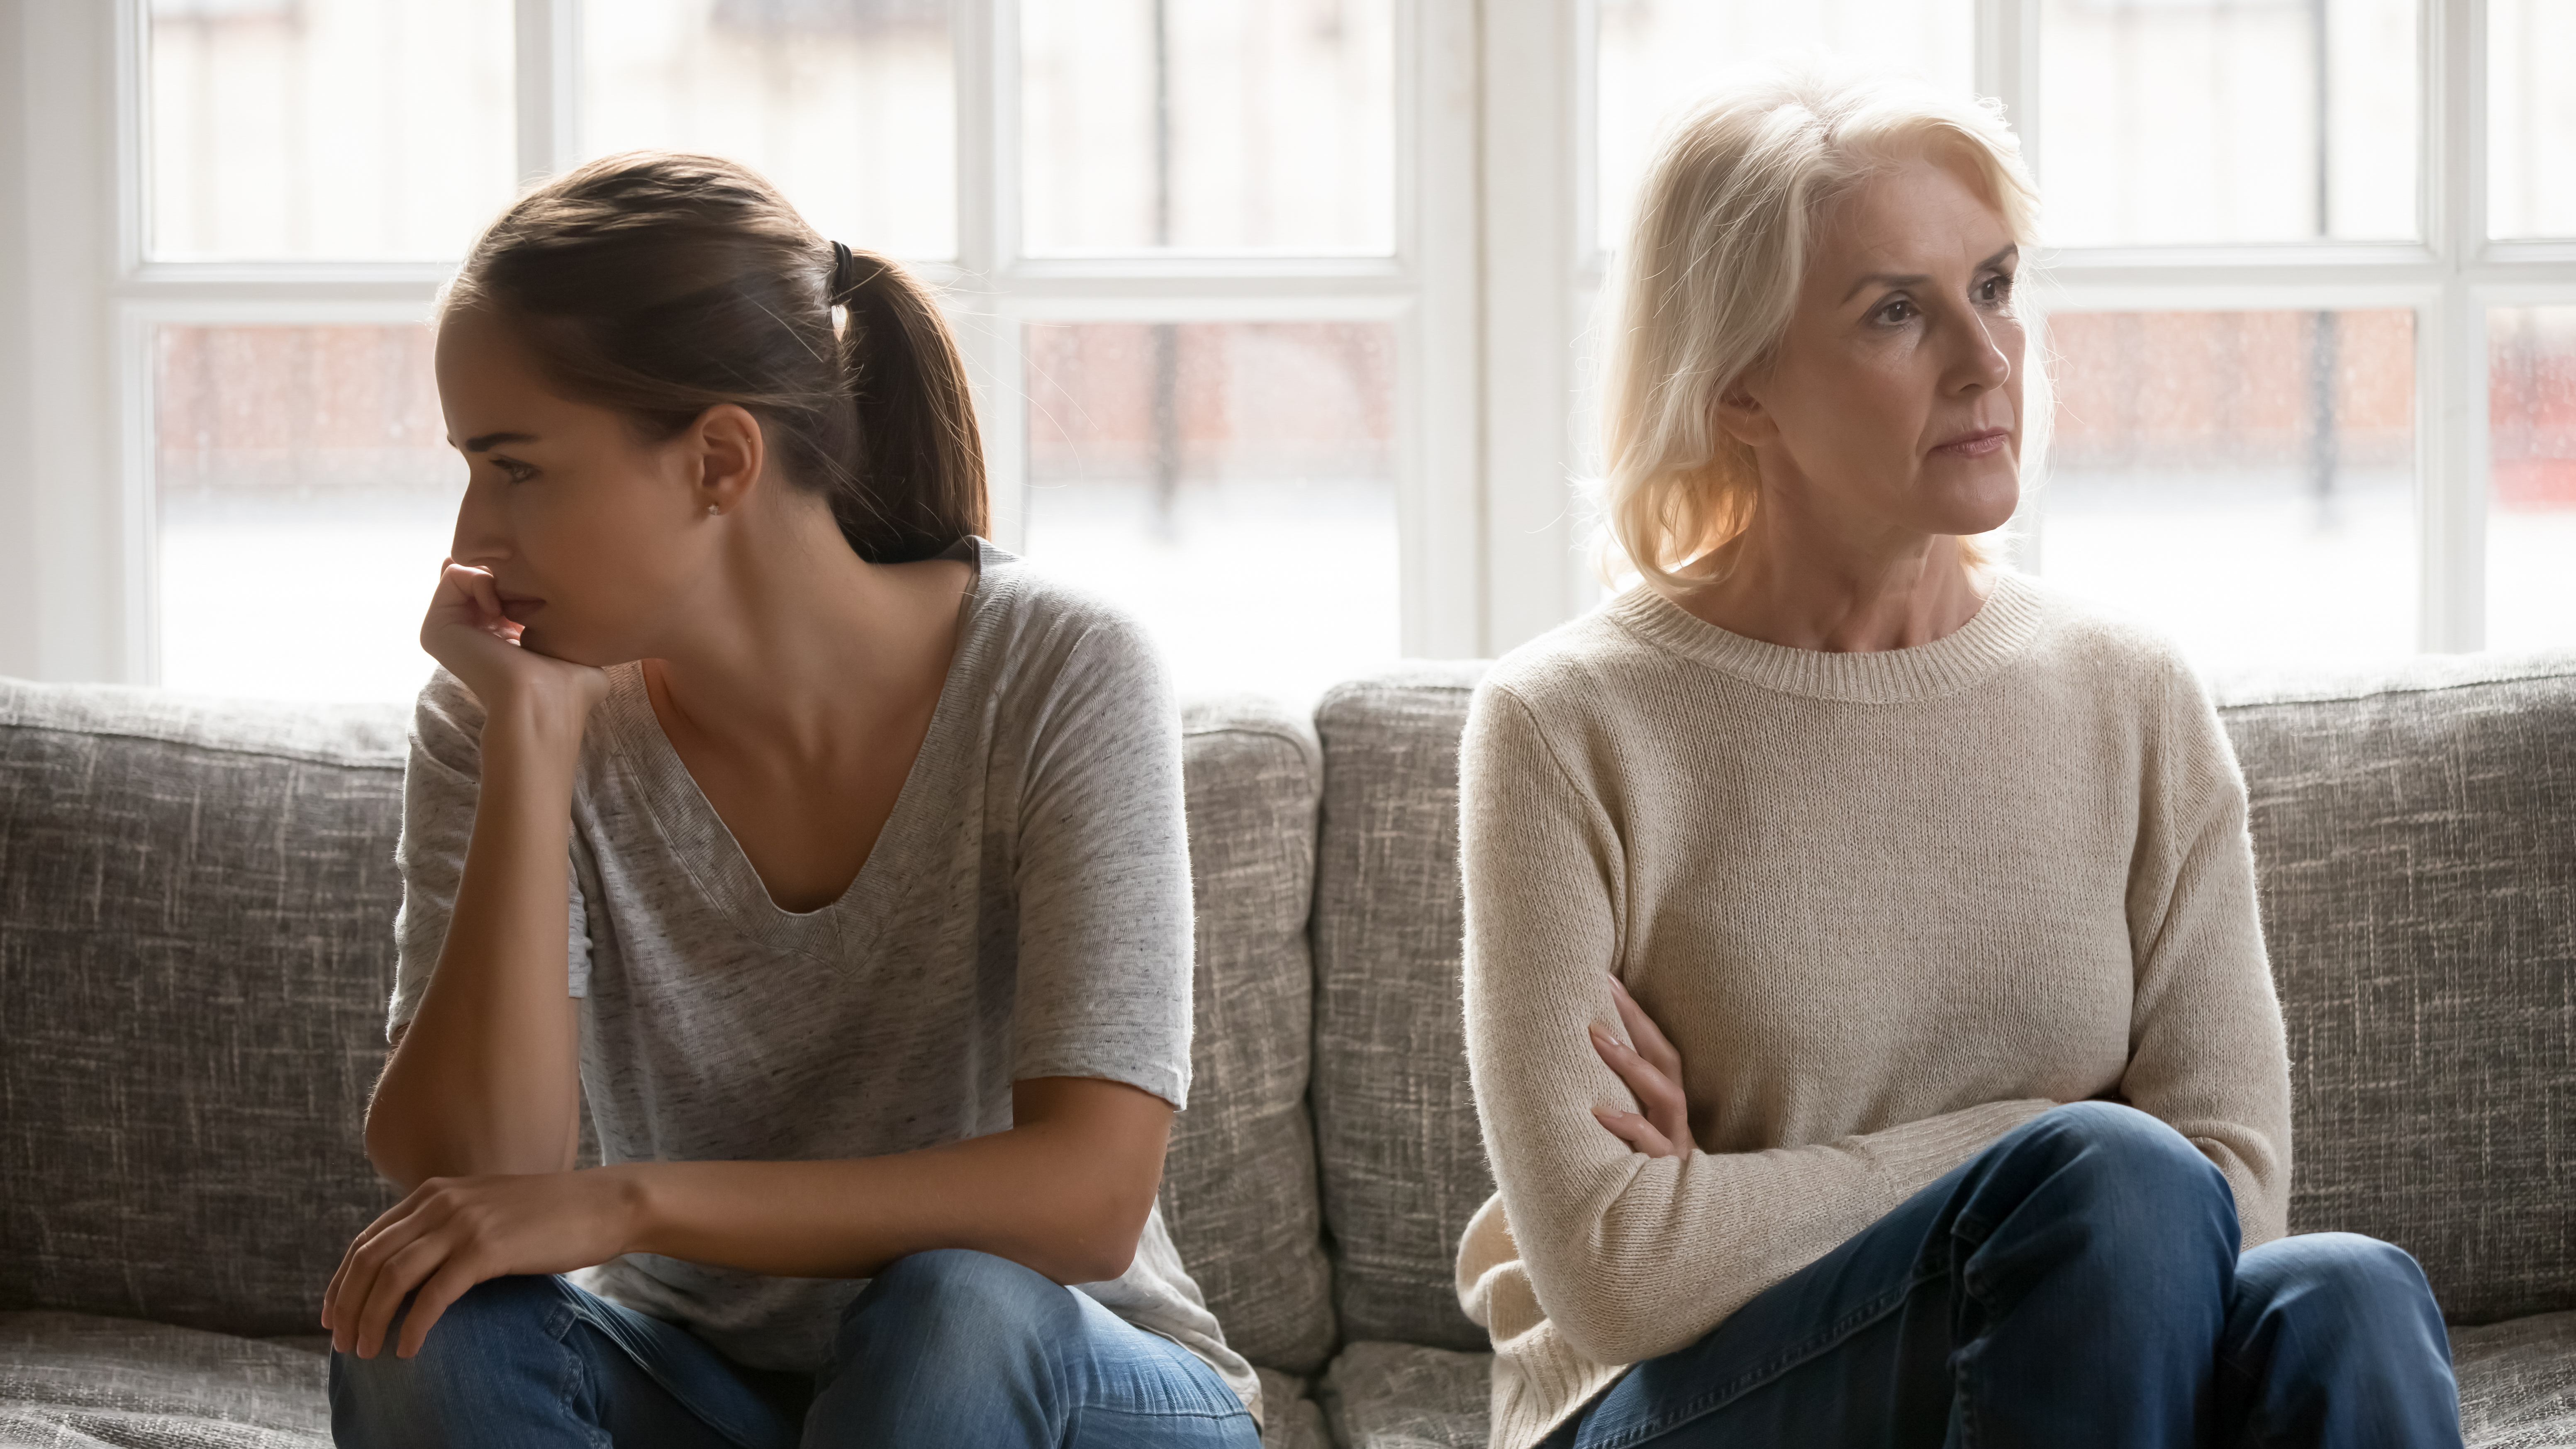 An upset young woman and senior woman sitting on a sofa | Source: Shutterstock